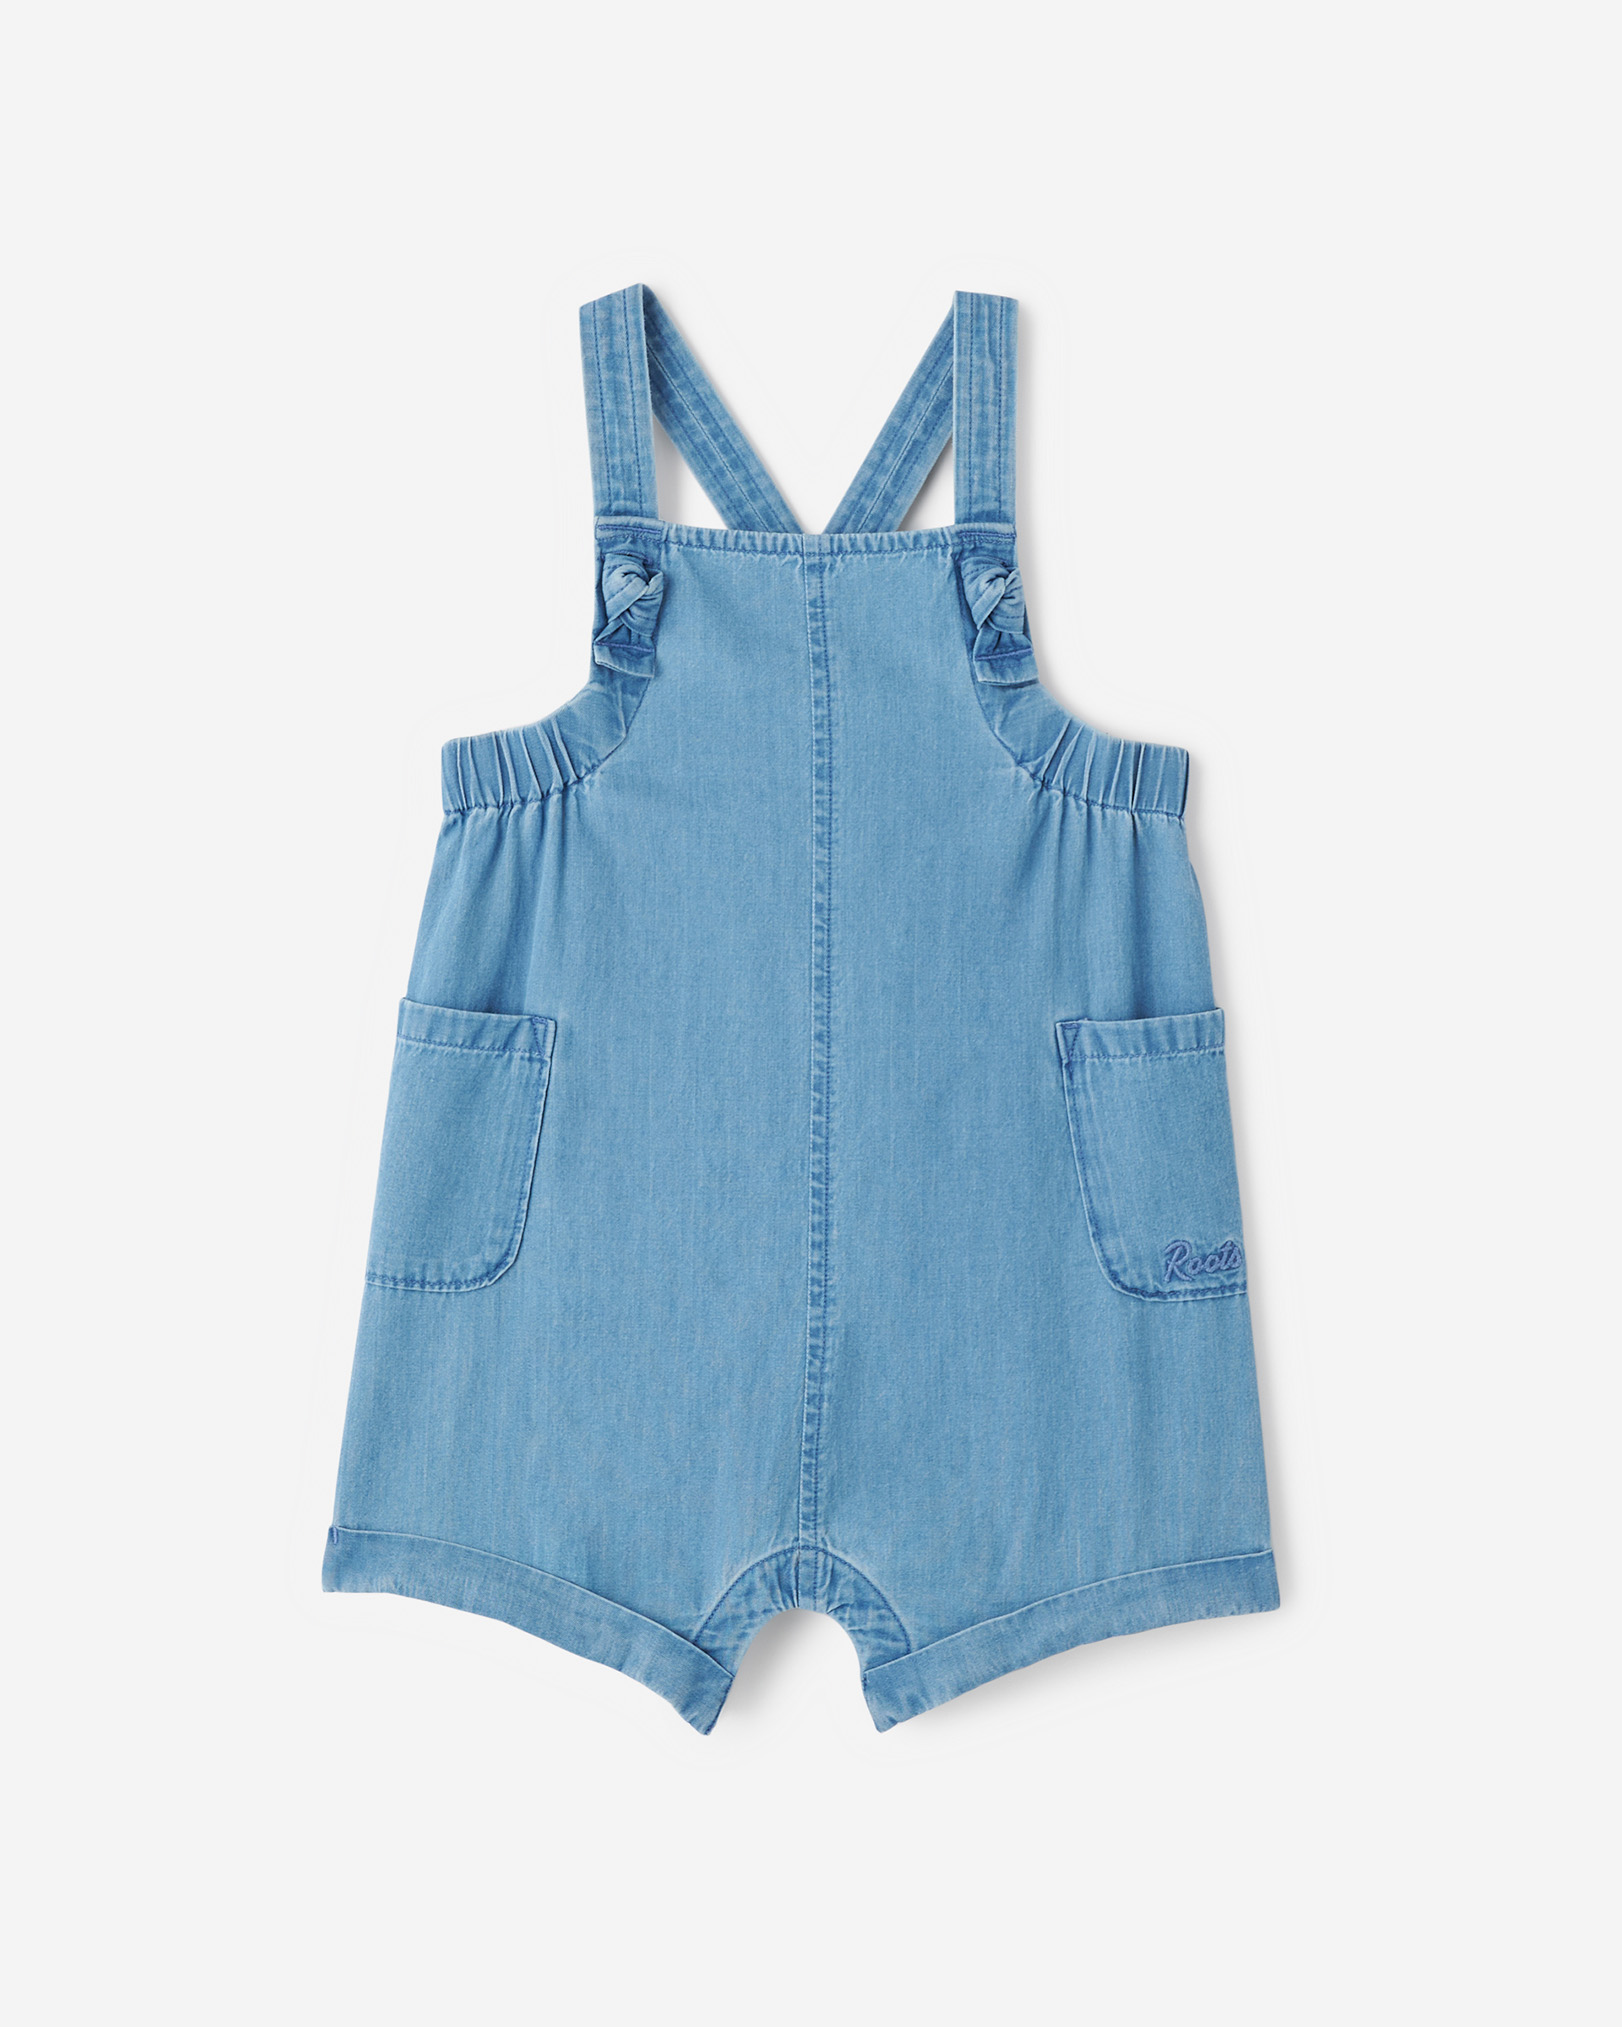 Roots Baby Chambray Overall in Washed Indigo